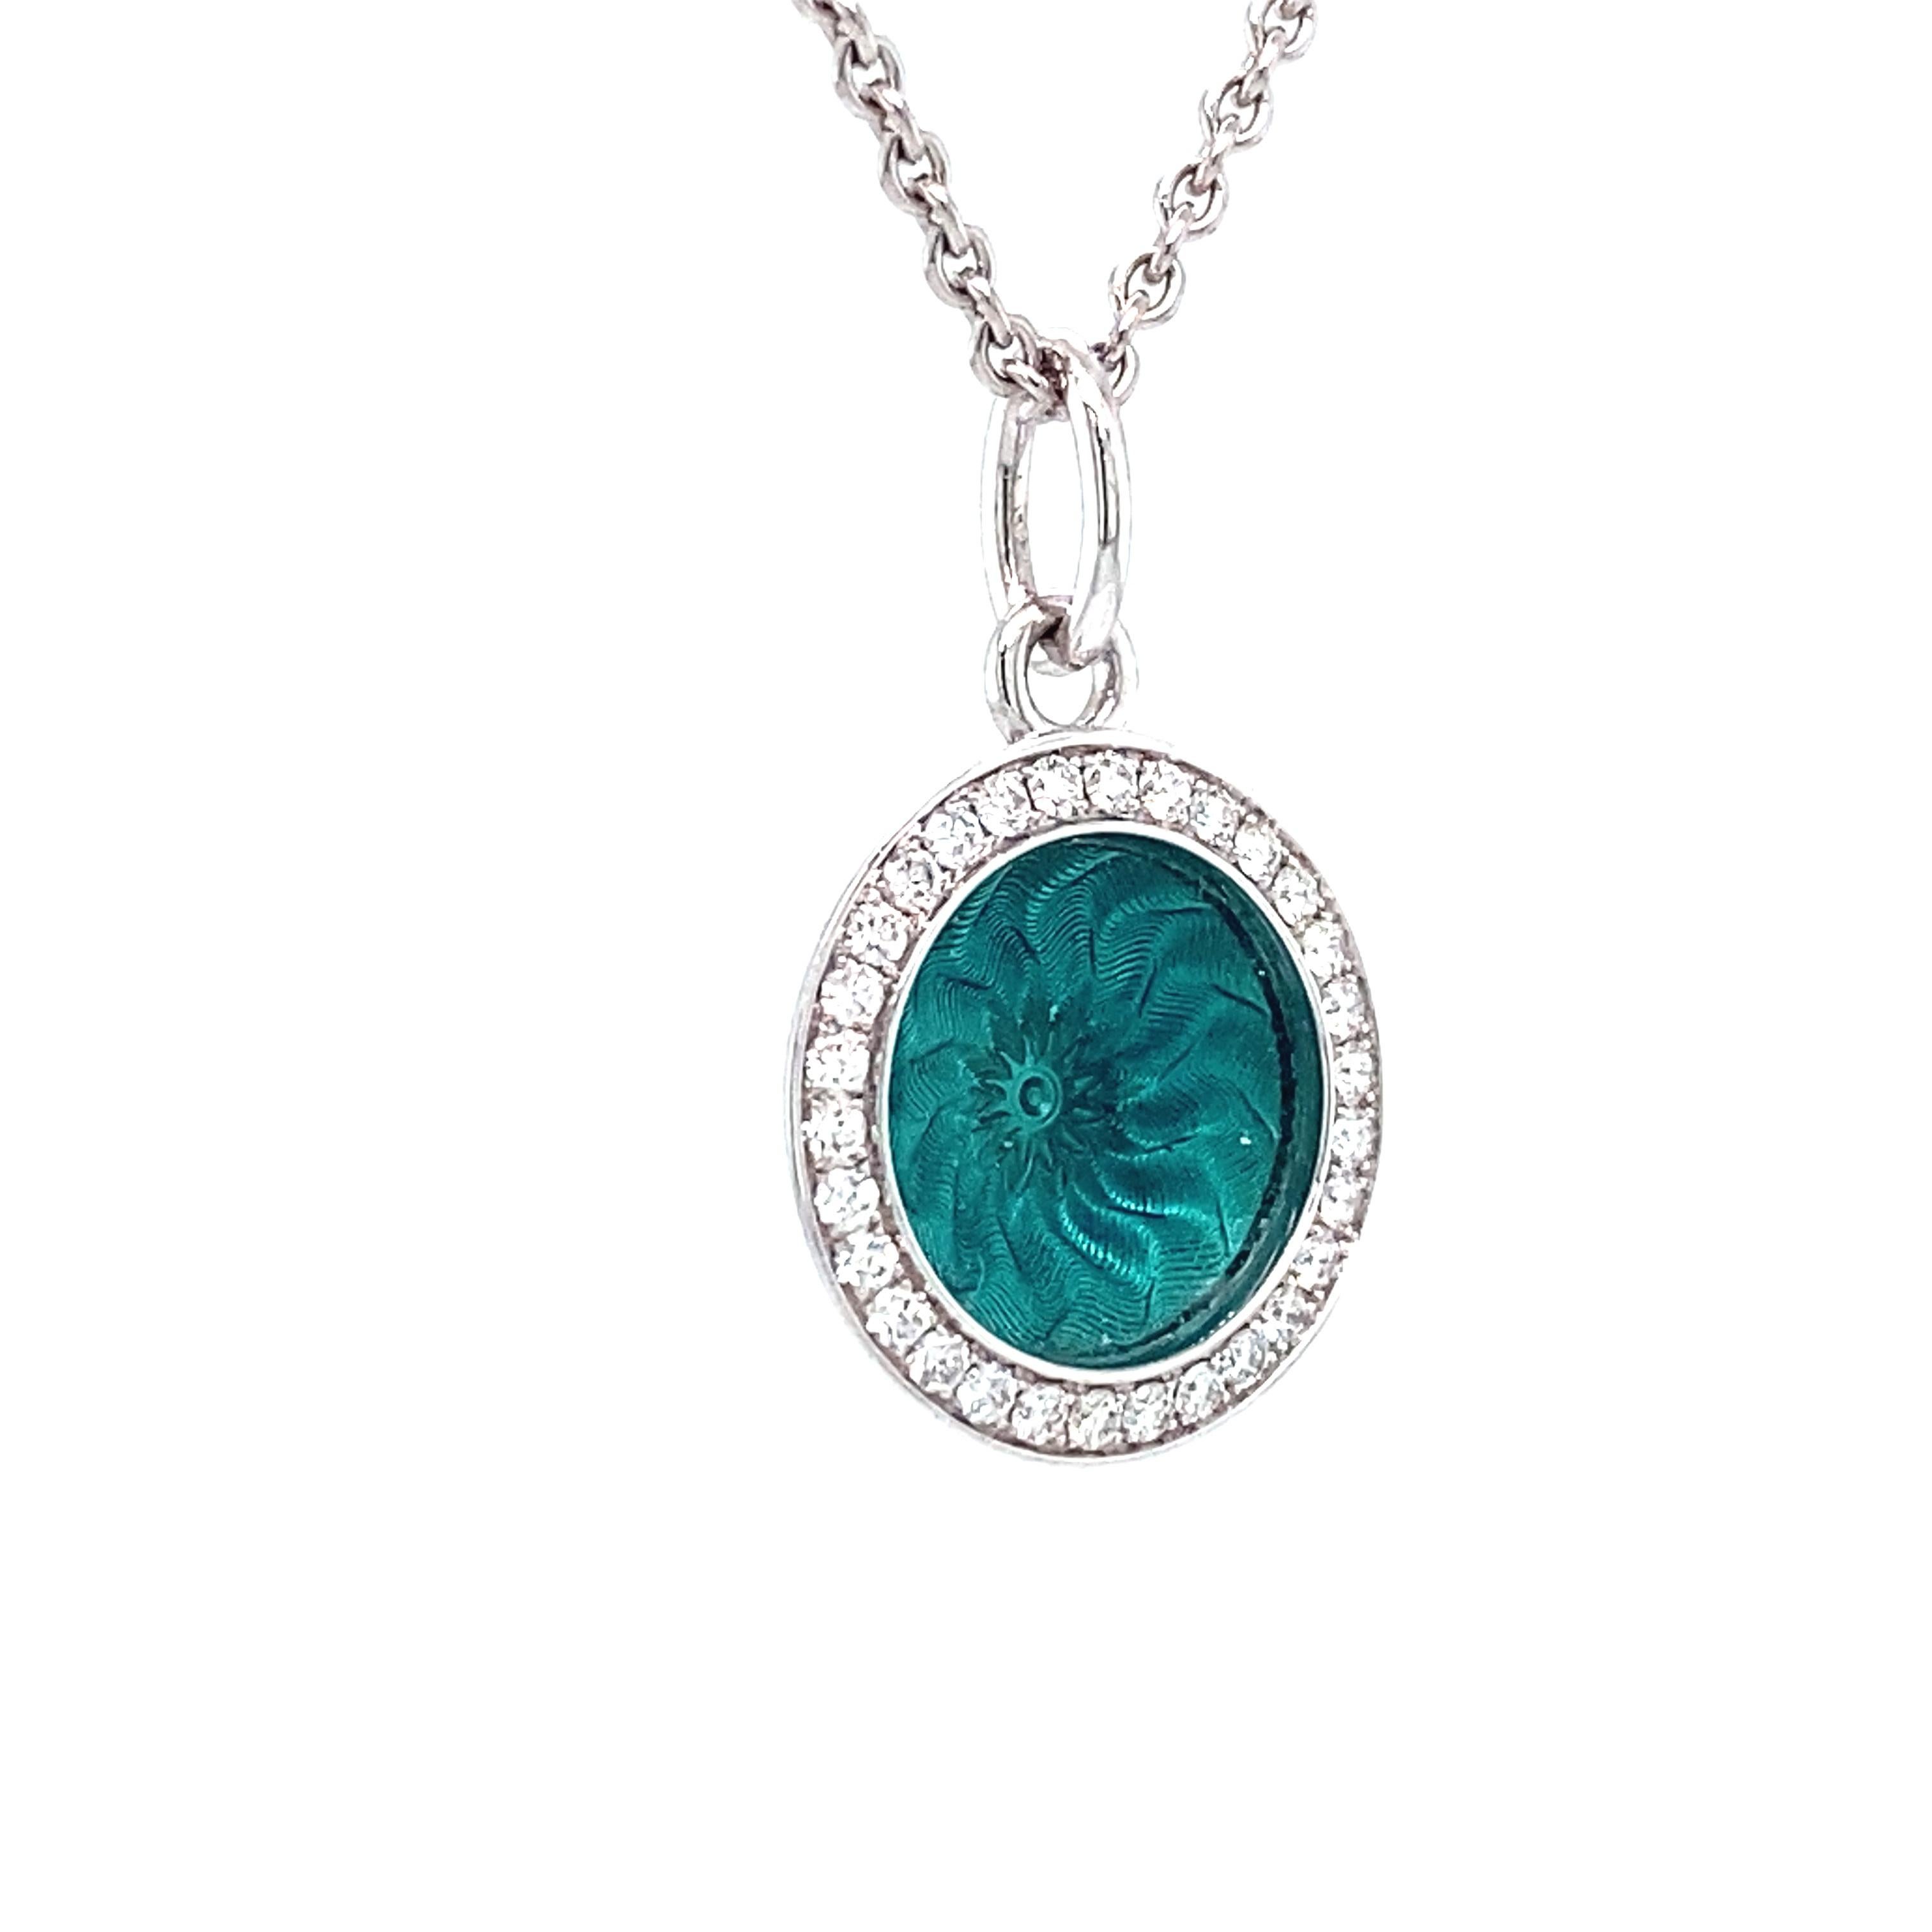 Victor Mayer round pendant 18k white gold, Trance Collection, translucent turquoise vitreous enamel, guilloche, 30 diamonds, total 0.15 ct, G VS, diameter app. 12.5 mm

About the creator Victor Mayer
Victor Mayer is internationally renowned for